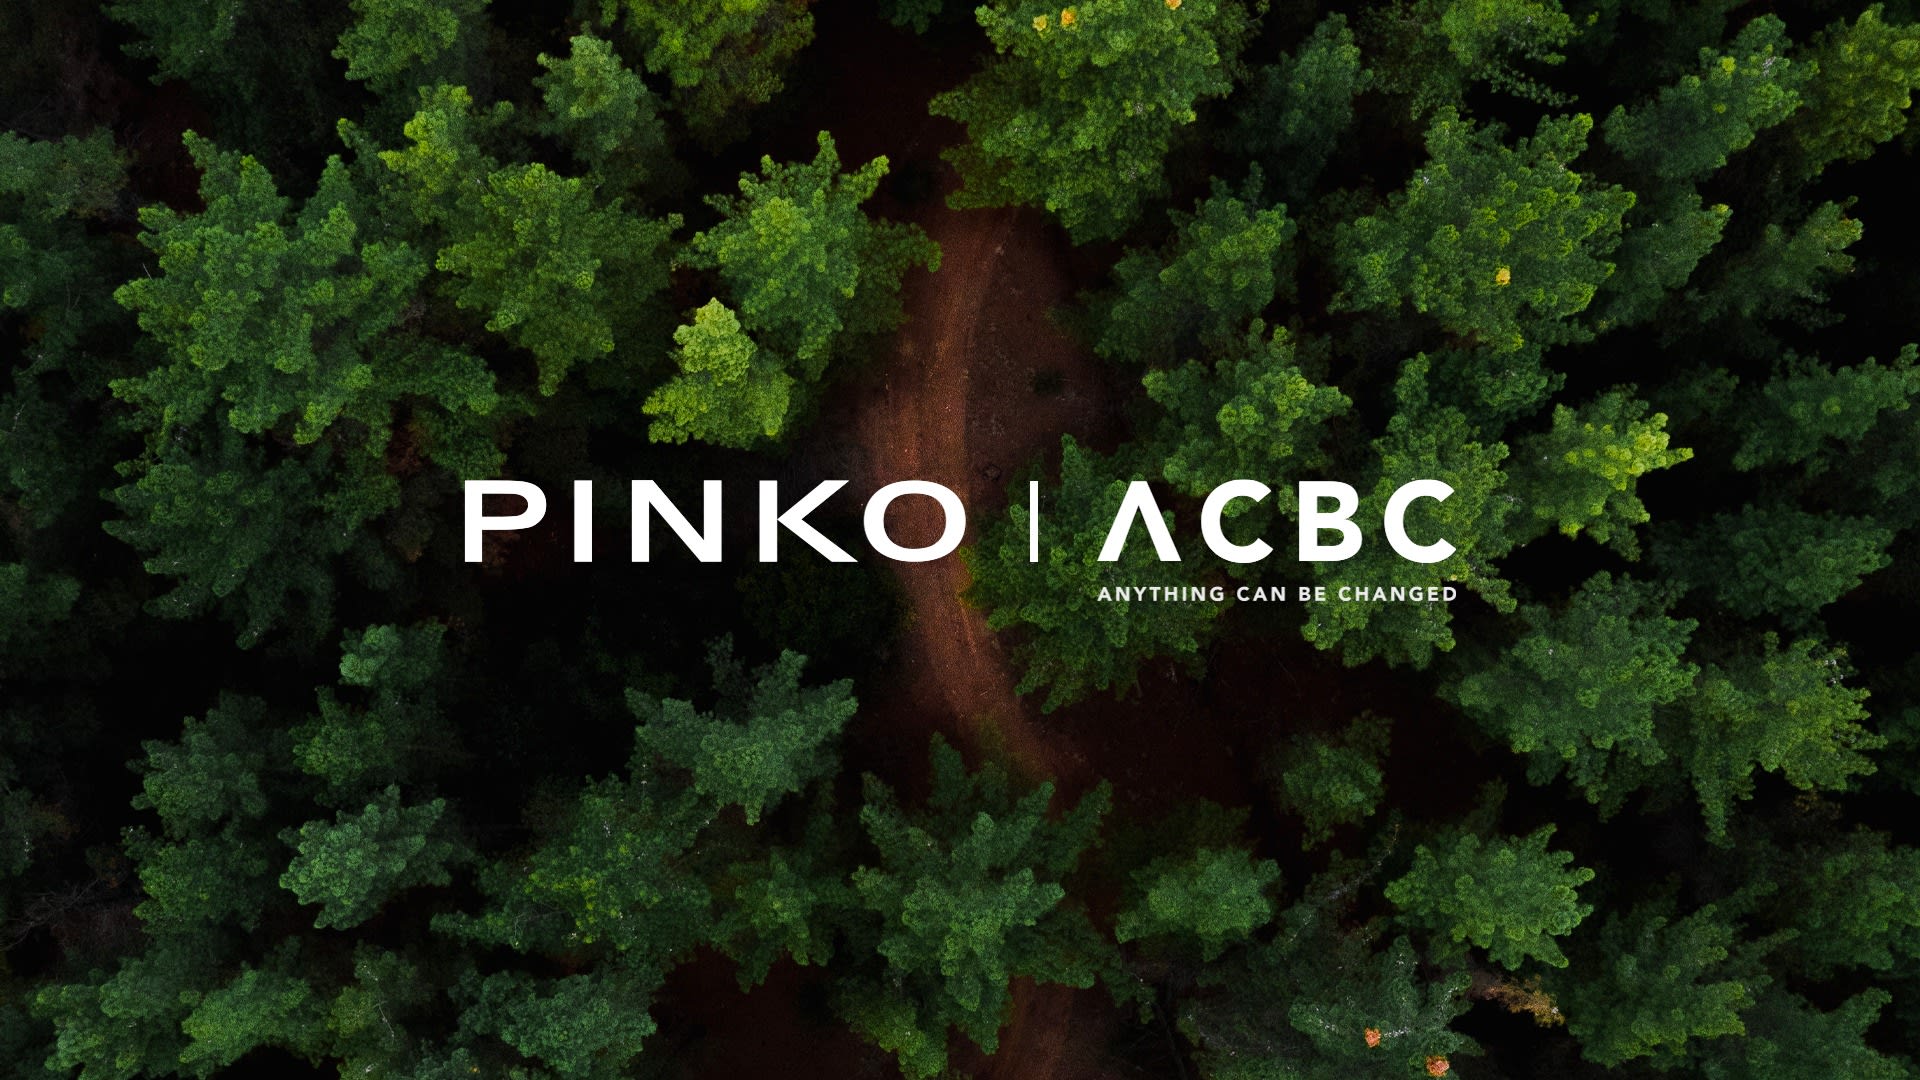 PINKO | ACBC<br>a #PINKOtakecare story